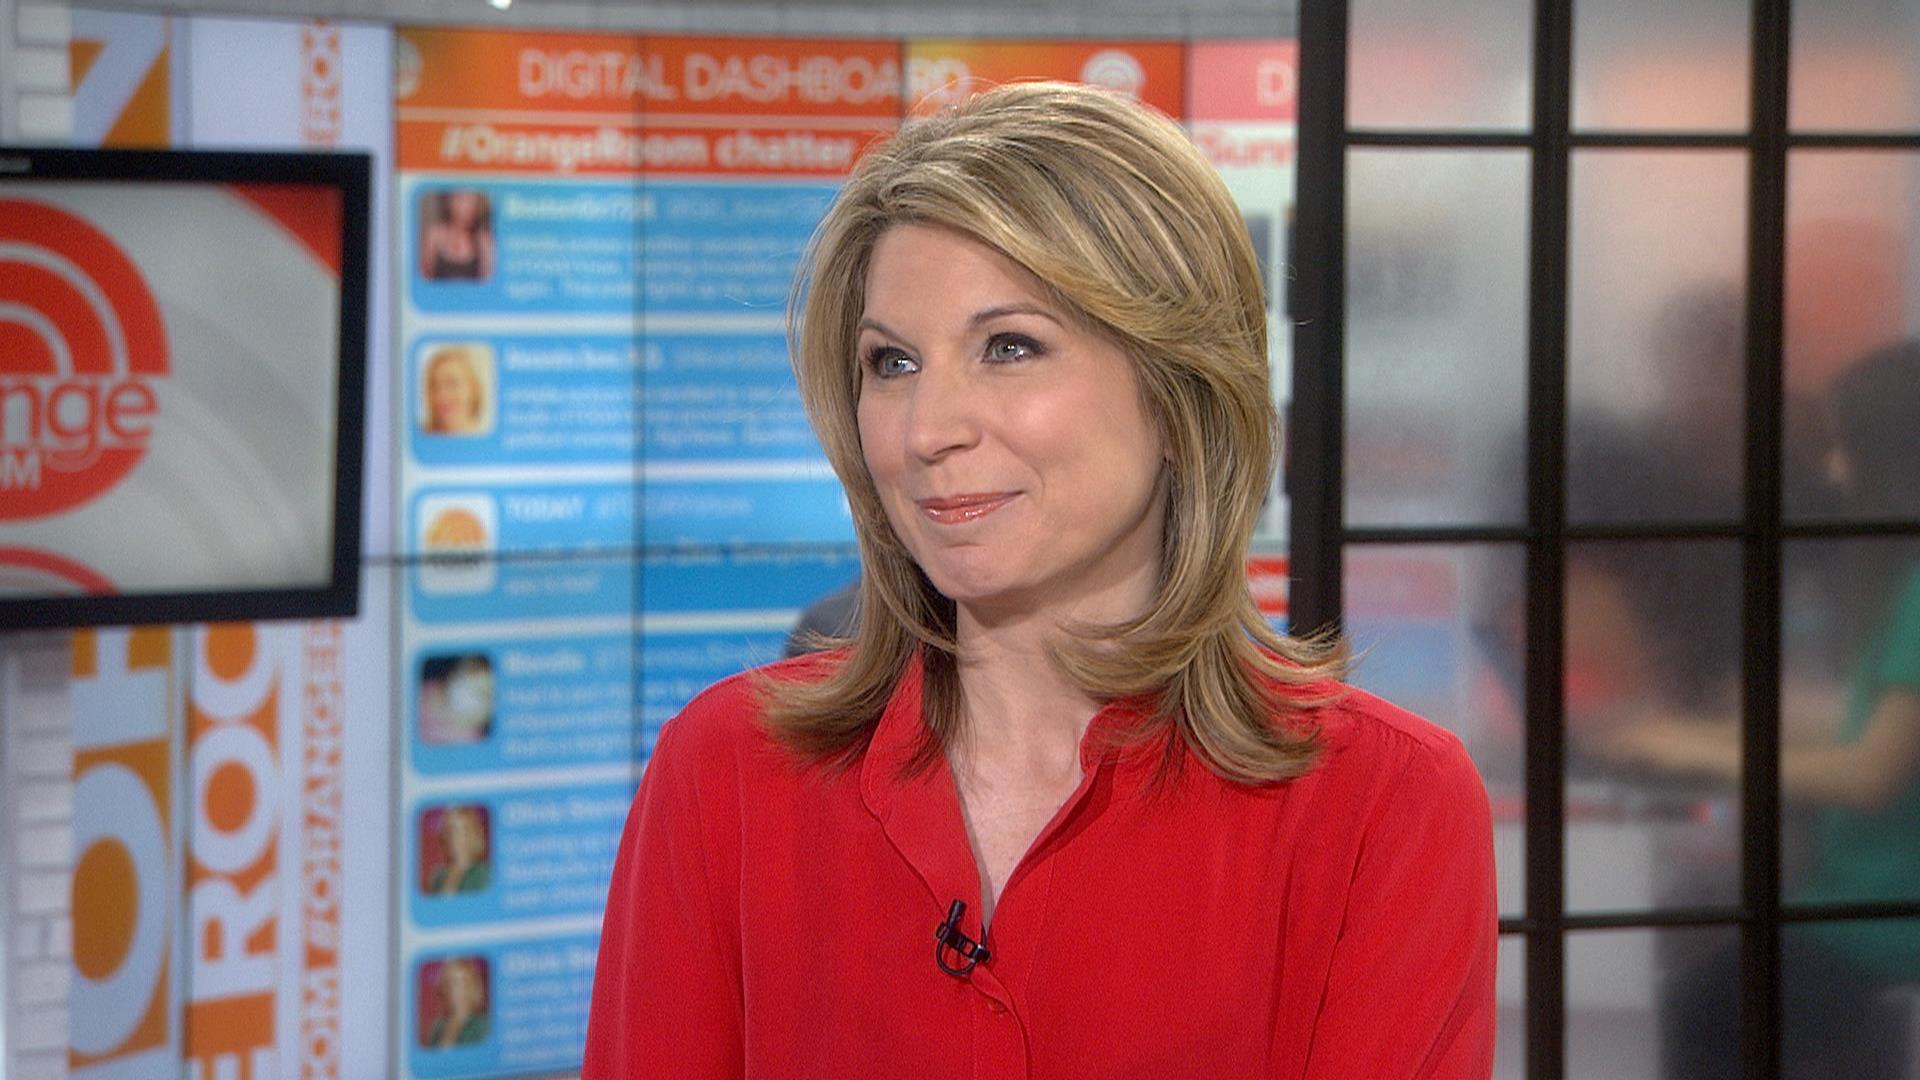 Analyst Nicolle Wallace: 'There are no white horses' to save GOP - TODAY.com